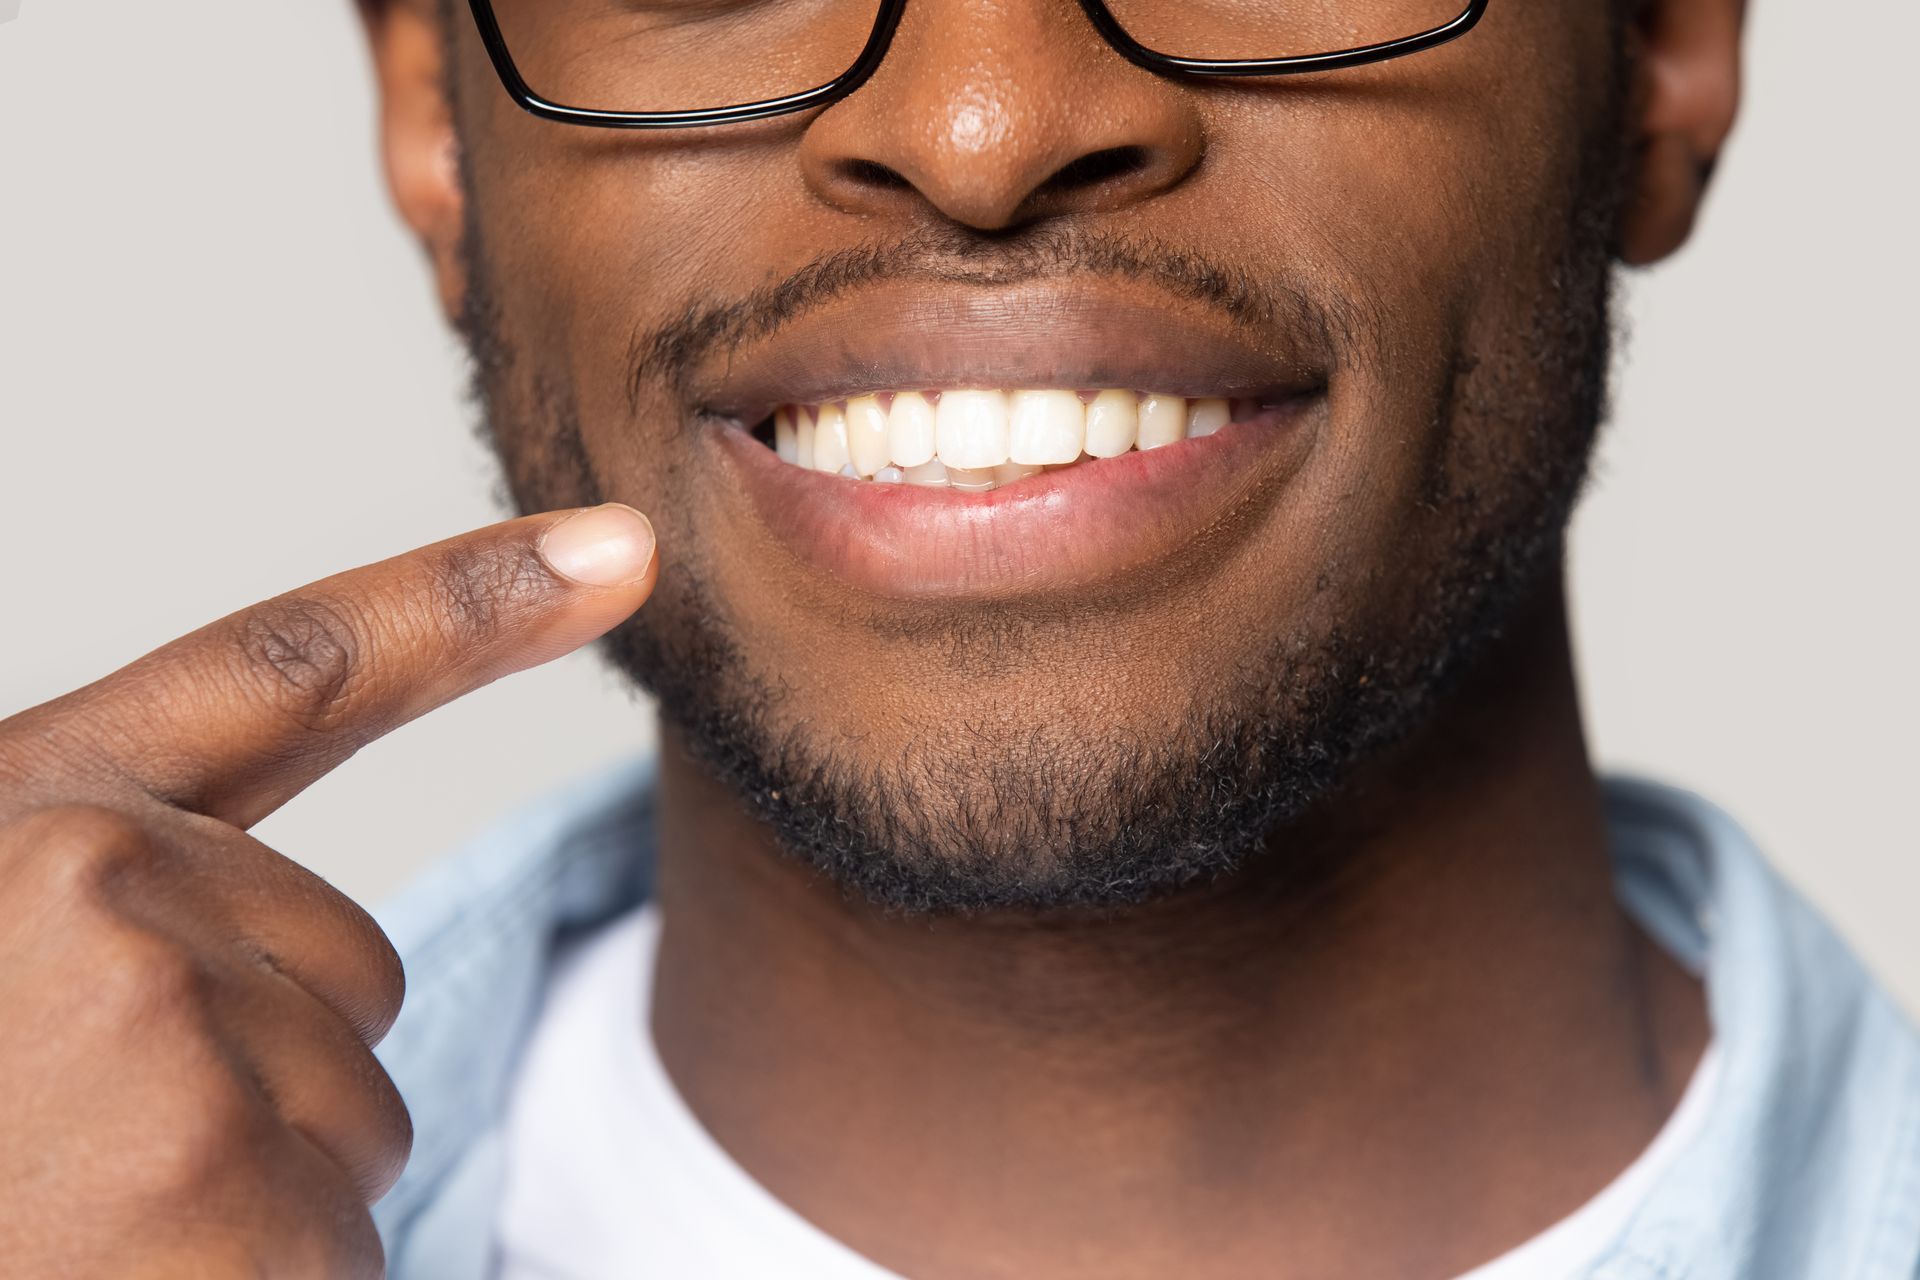 A close up of a man wearing glasses pointing at his teeth.